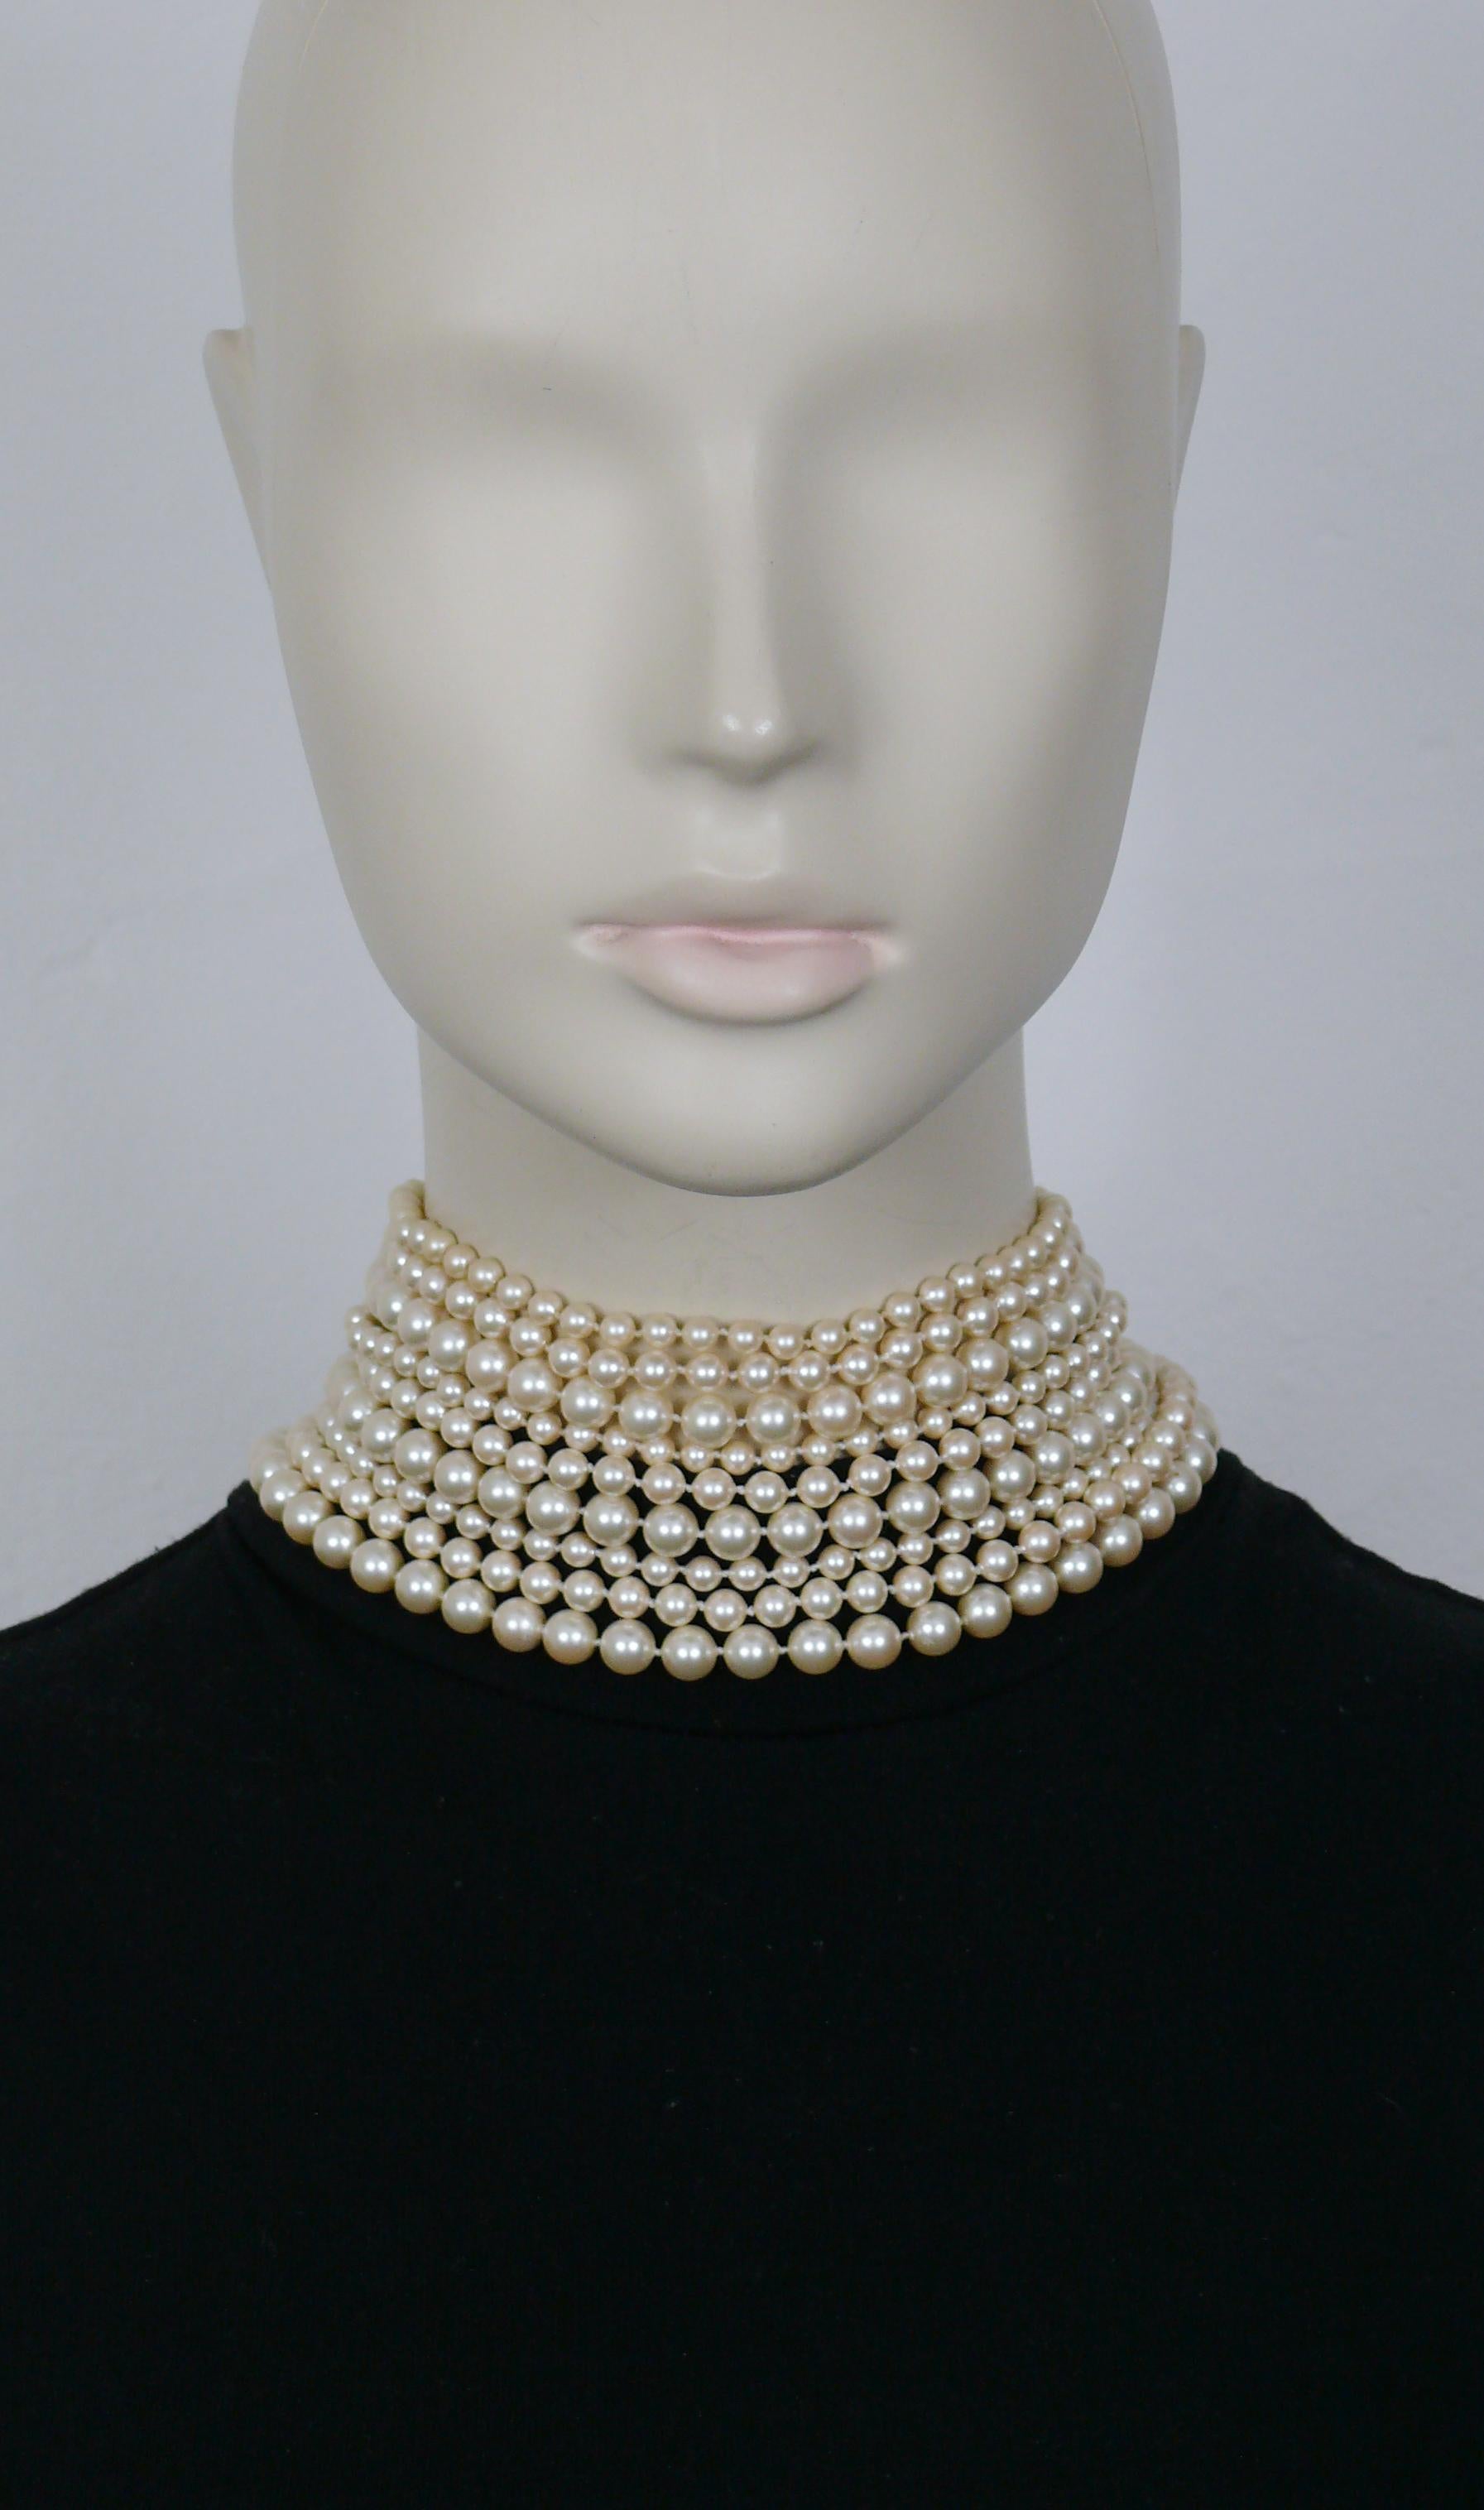 CHRISTIAN DIOR vintage nine strand faux pearl necklace of different sizes.

Double lobster clasp closure.
Extension chains.
Possibility of different styles depending on the length and the size of your neck (see examples on the pictures 2, 4 and